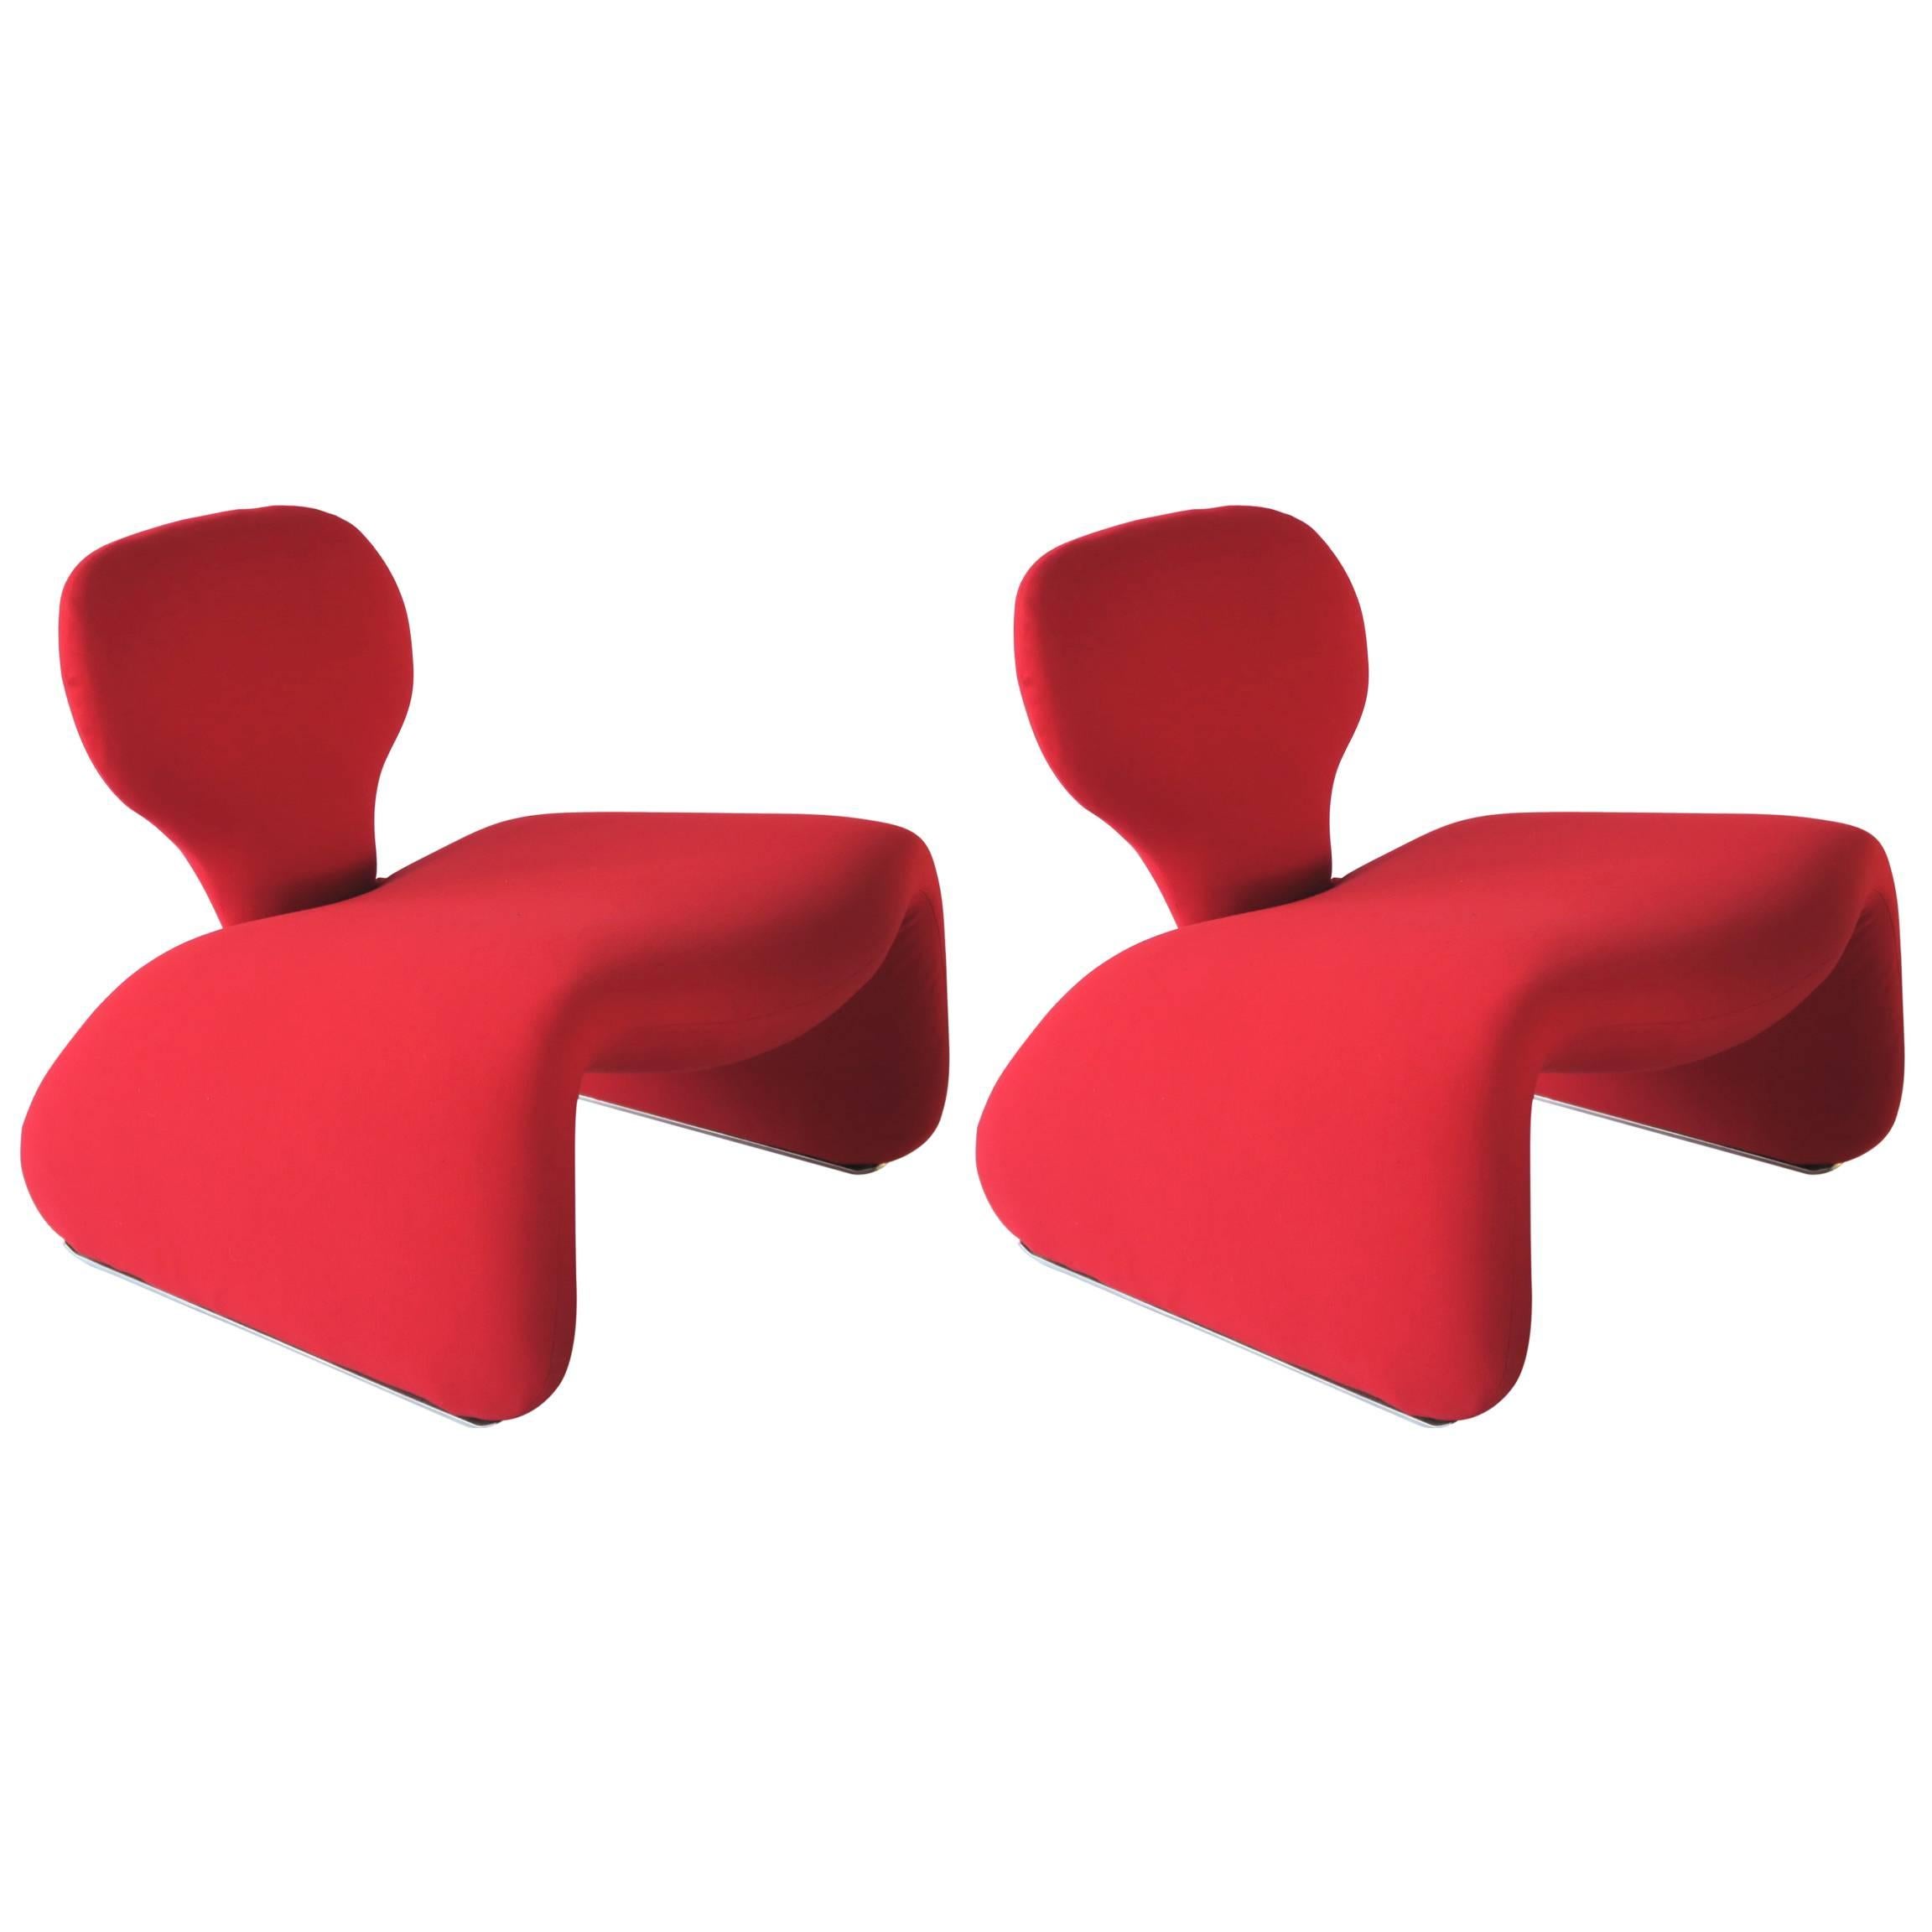 Pair of Djinn Chairs by Olivier Mourgue, 1965